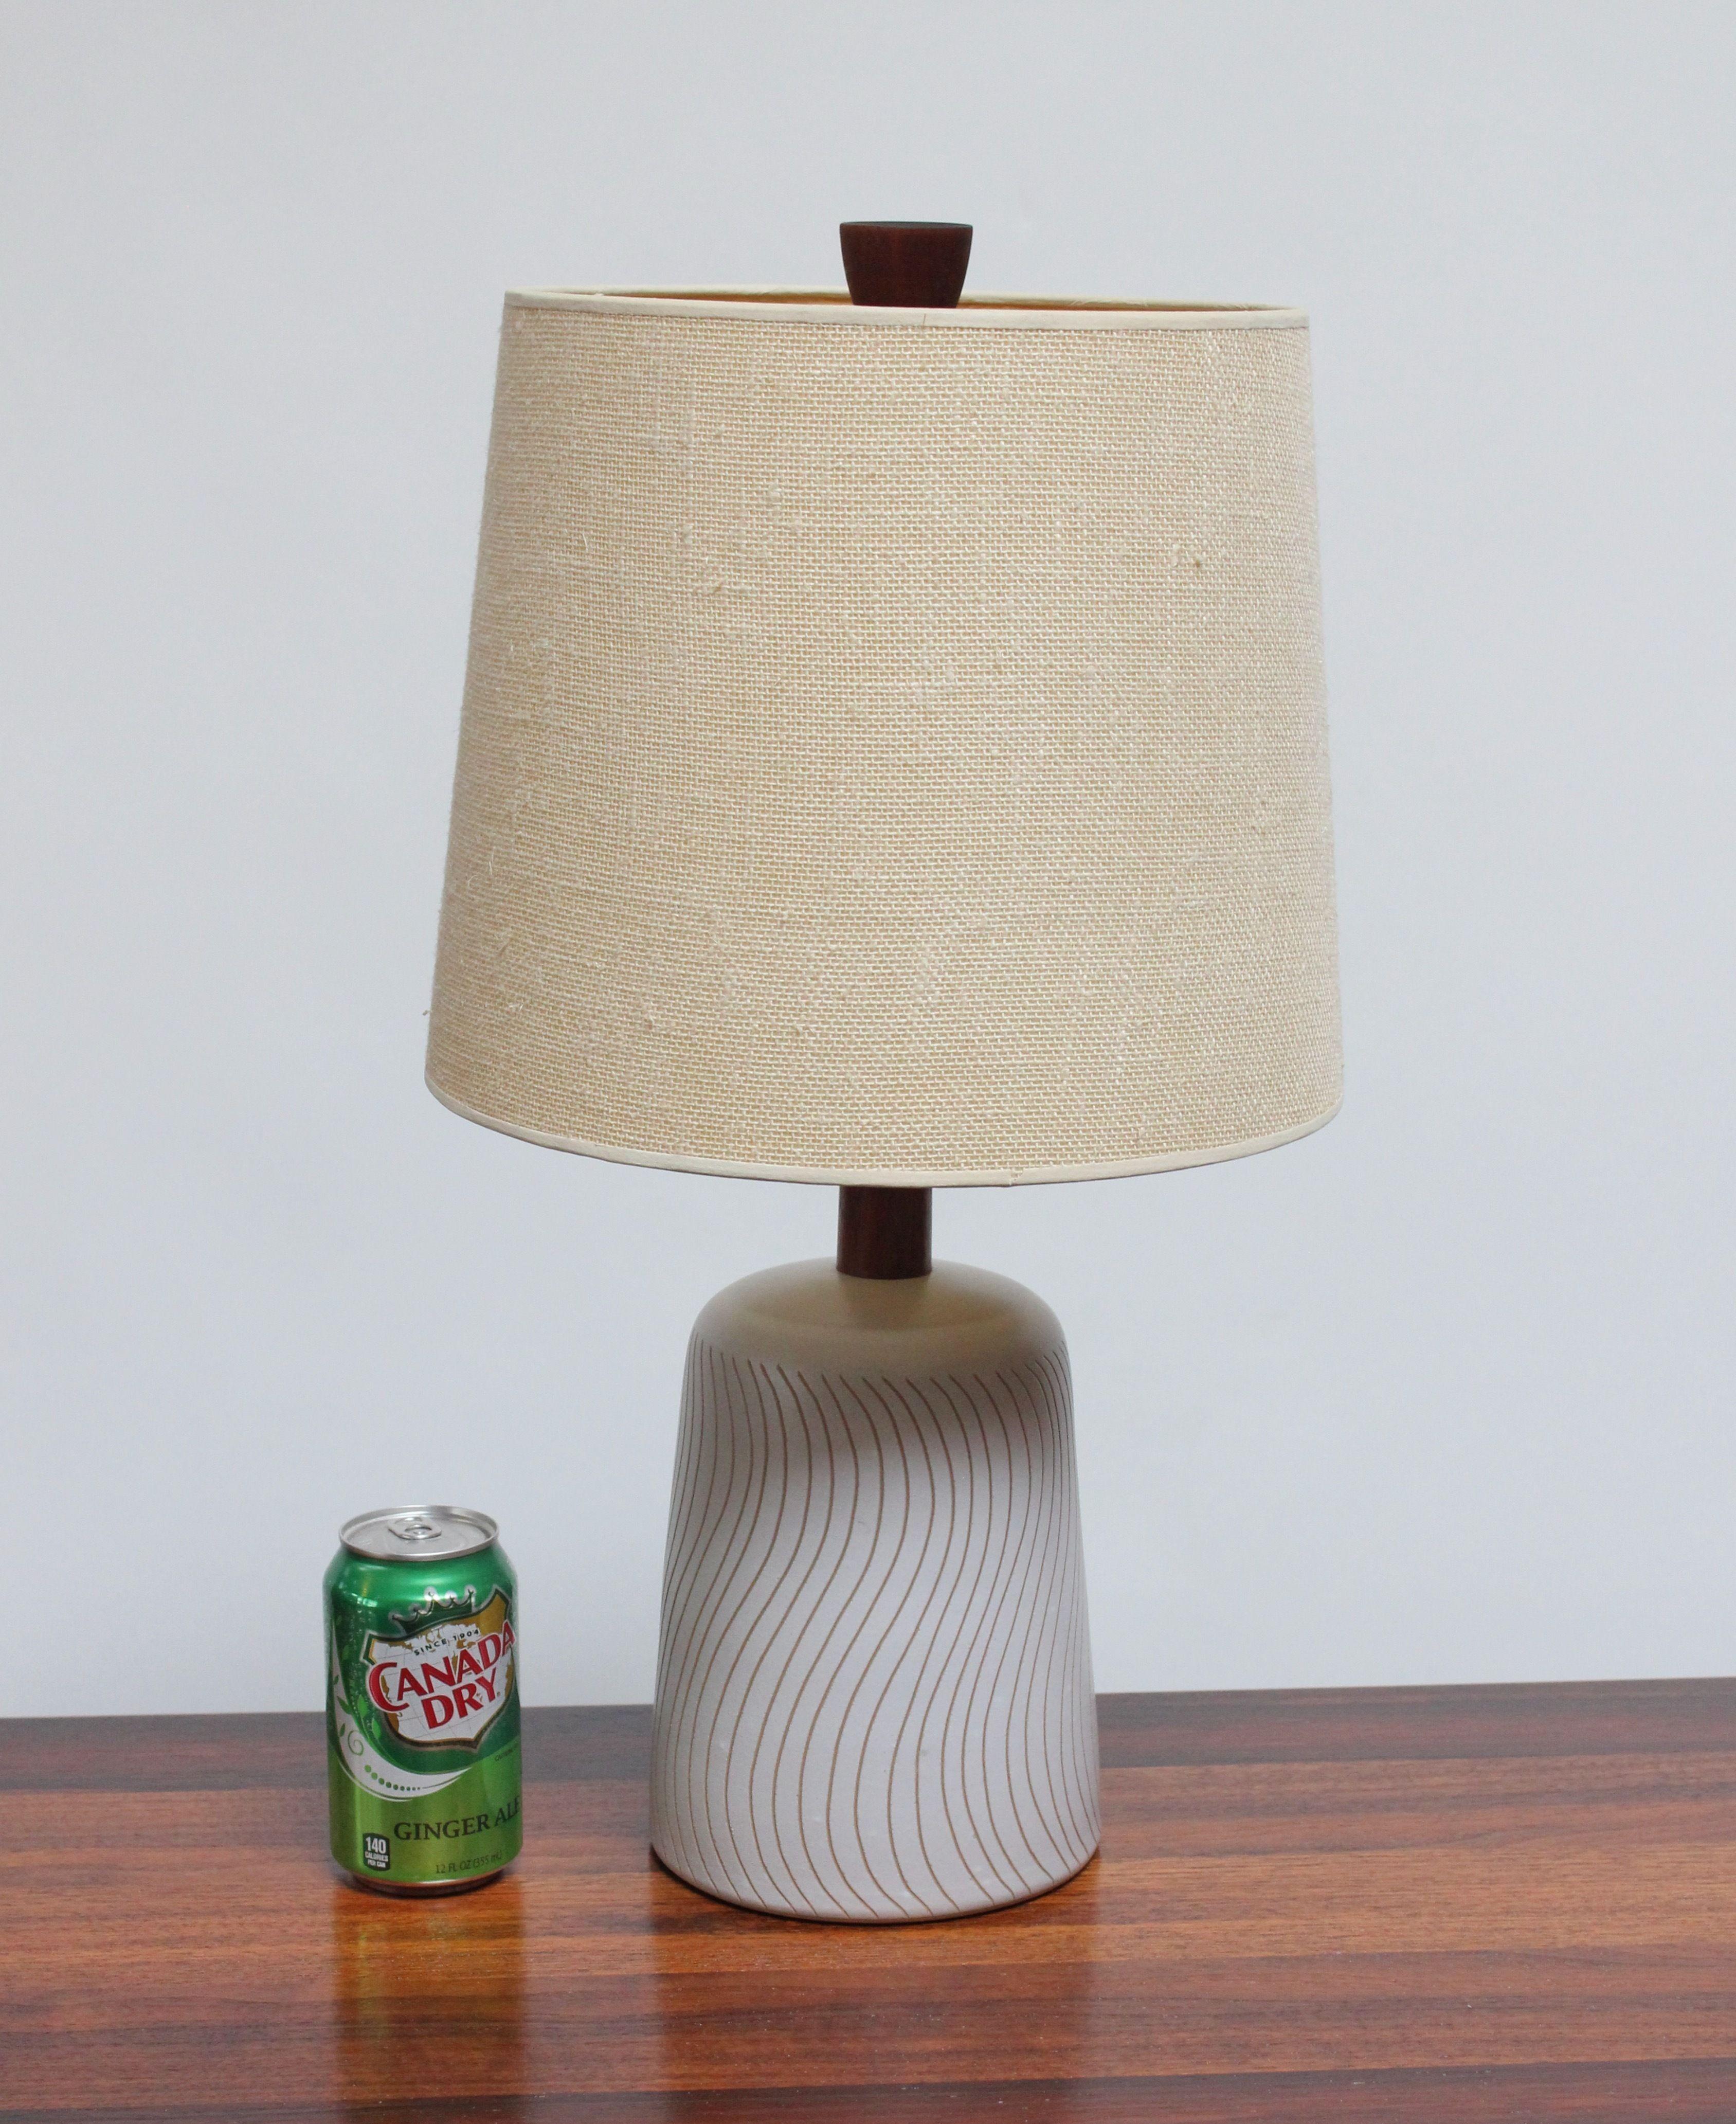 Brass Vintage Martz Ceramic and Walnut Table Lamp with Sgraffito Detail and Shade